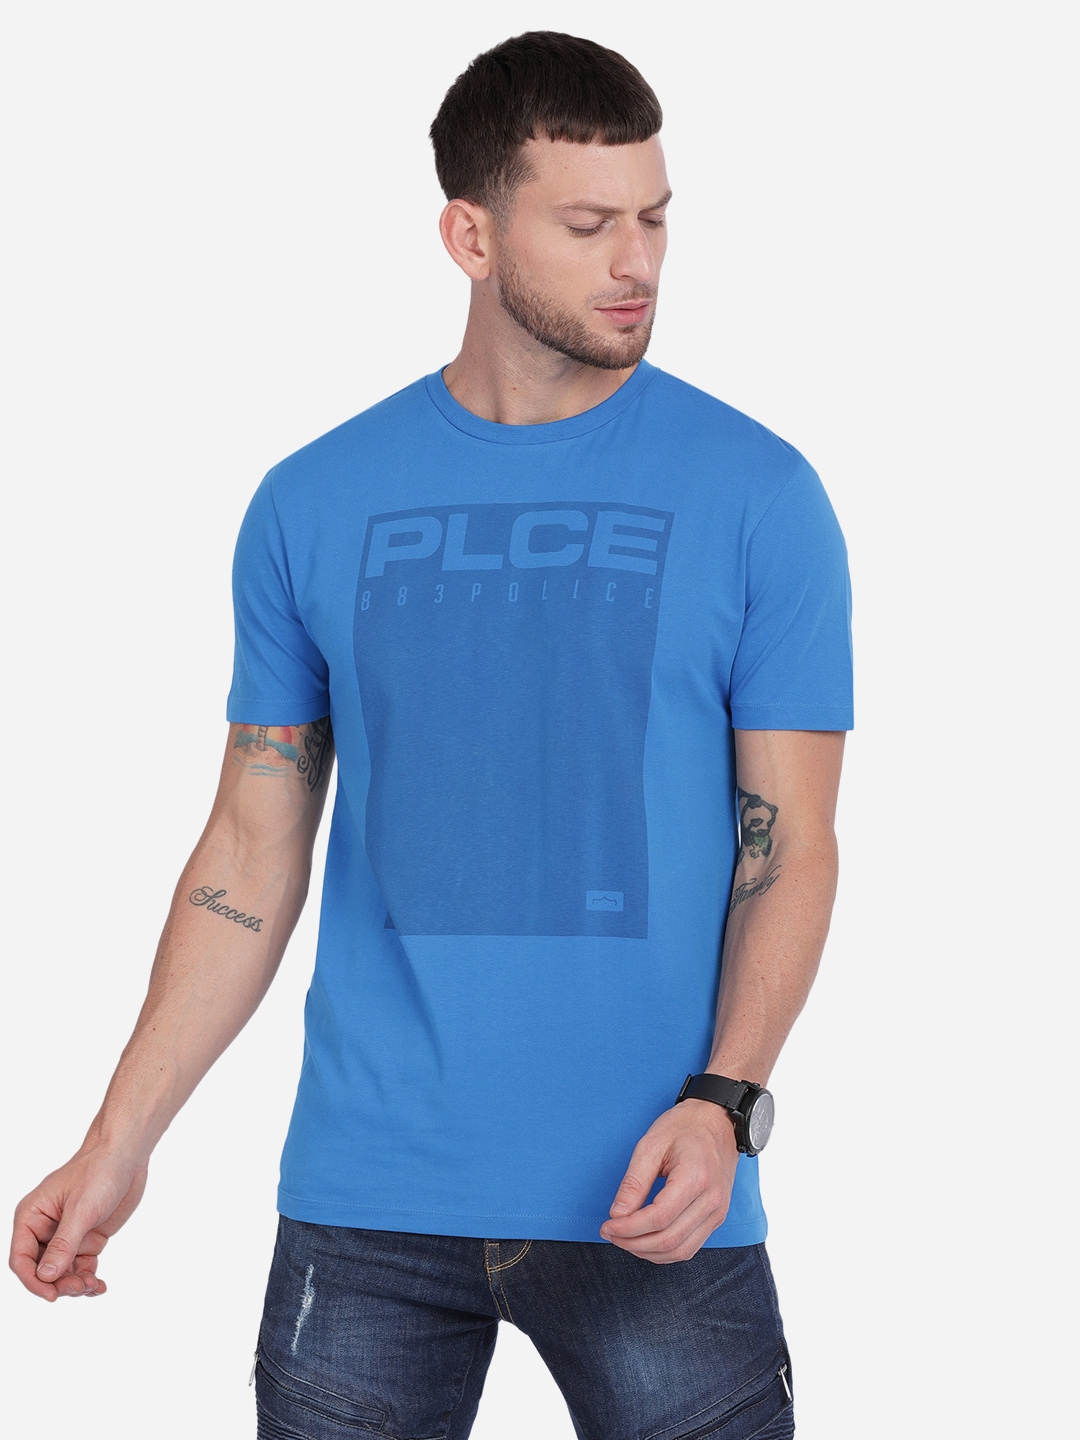 883 Police | Blue Printed Toned T-Shirt